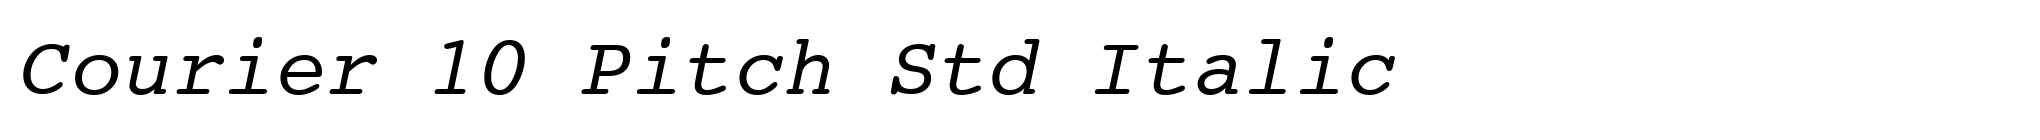 Courier 10 Pitch Std Italic image